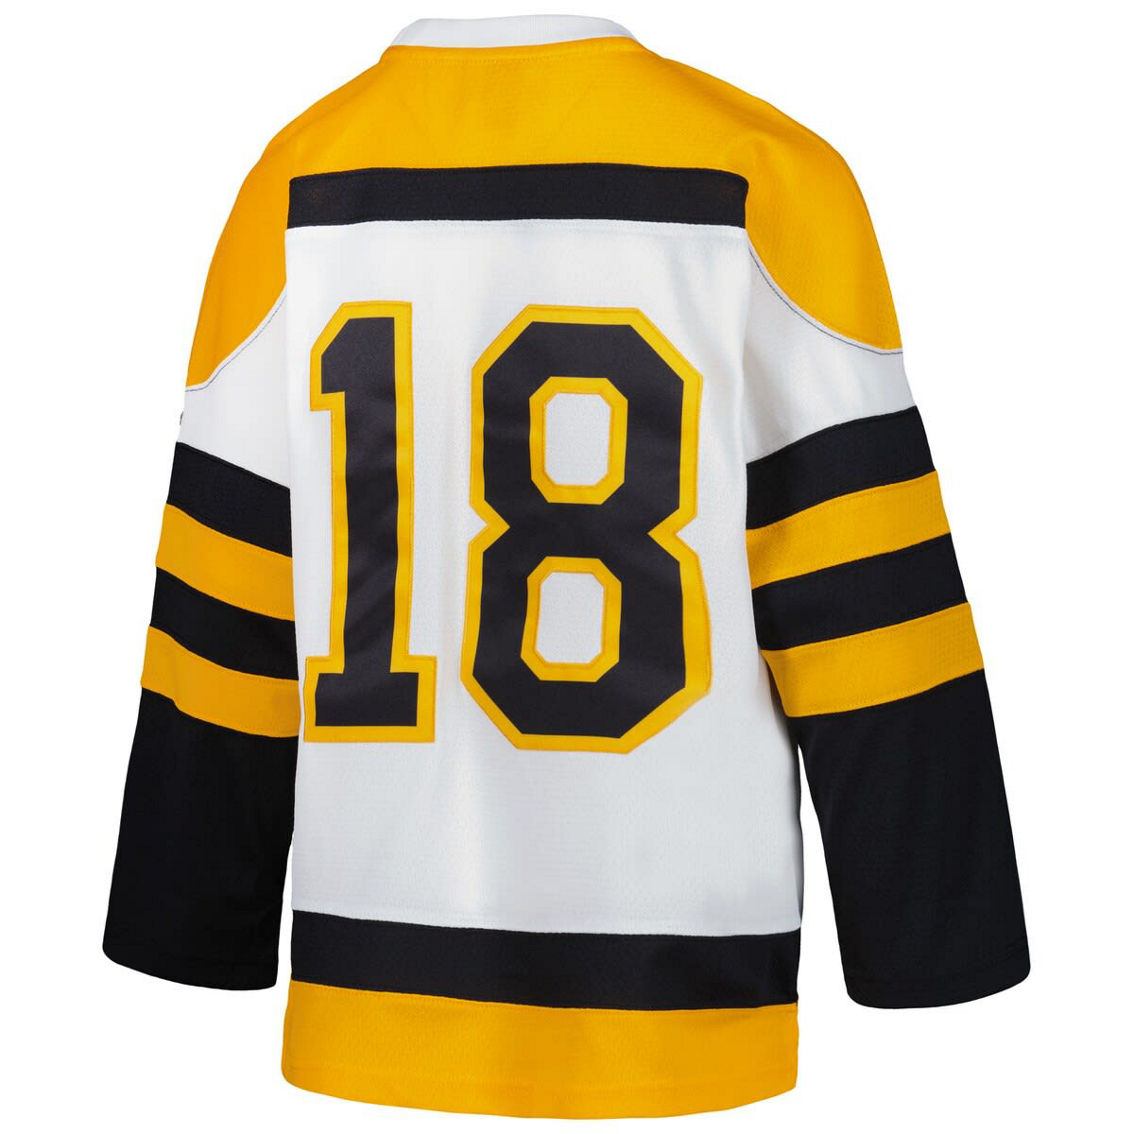 Mitchell & Ness Youth Willie O'Ree White Boston Bruins 1958 Blue Line Player Jersey - Image 4 of 4